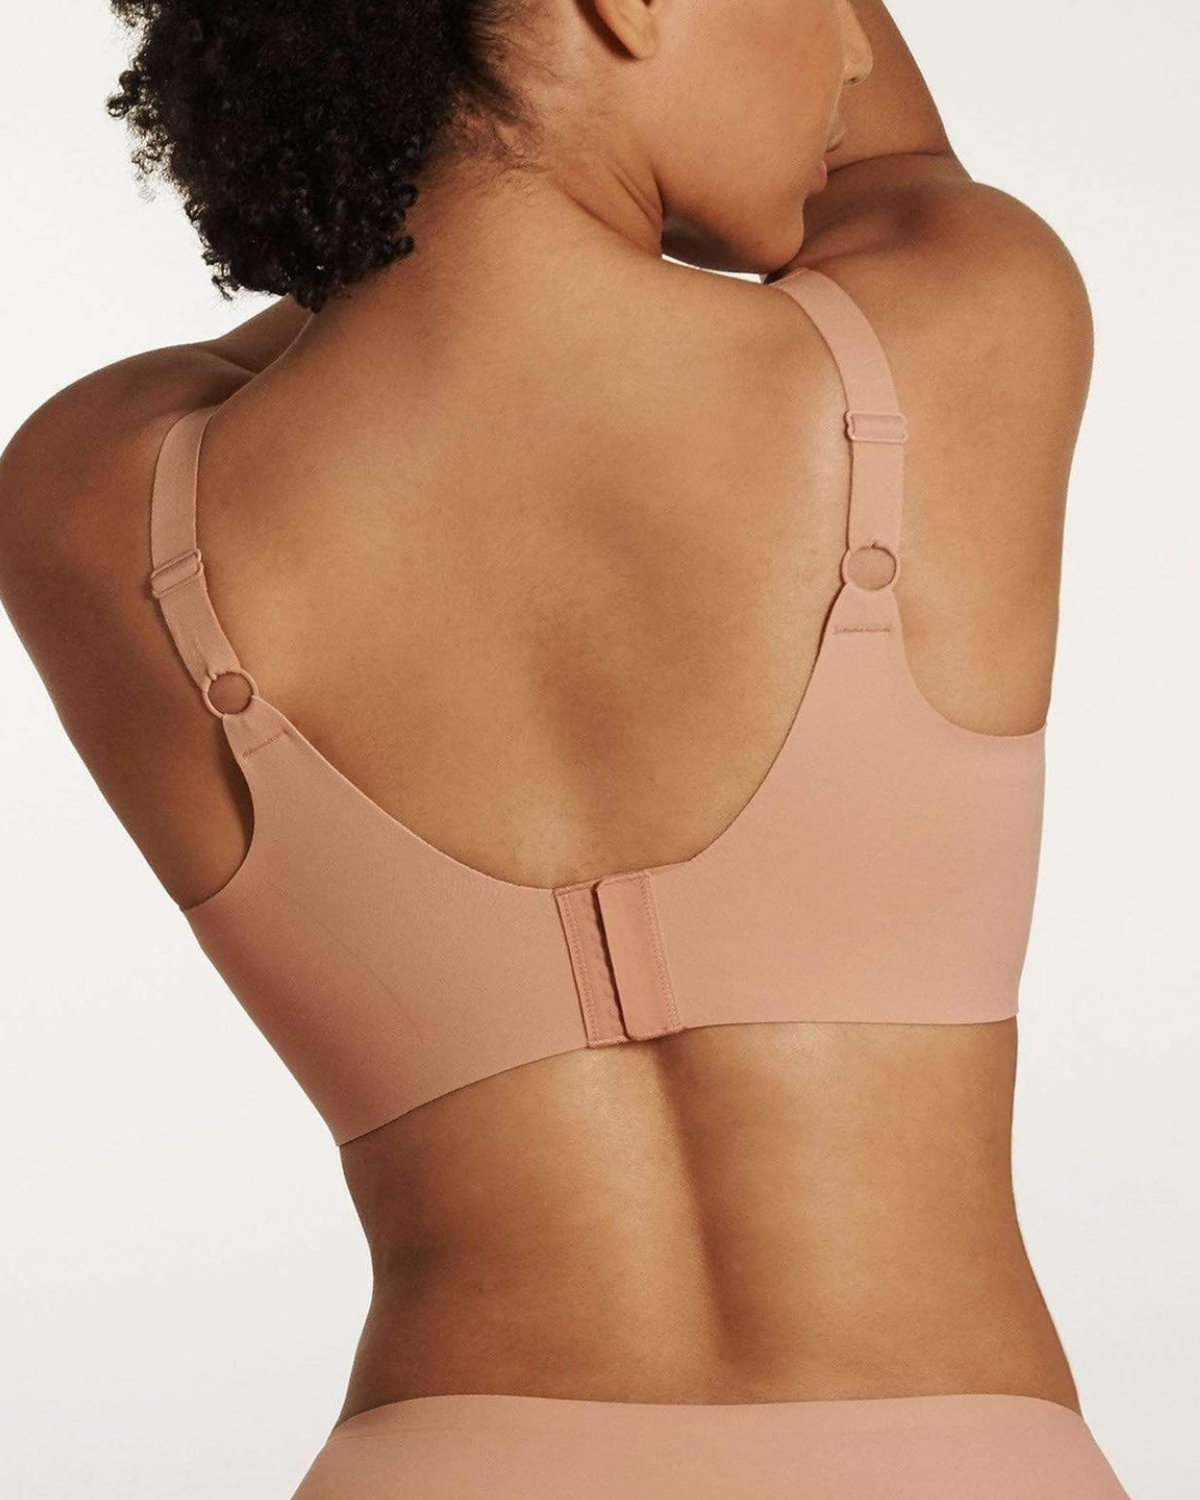 Evelyn Bobbie: Support Without An Underwire – An Intimate Affaire